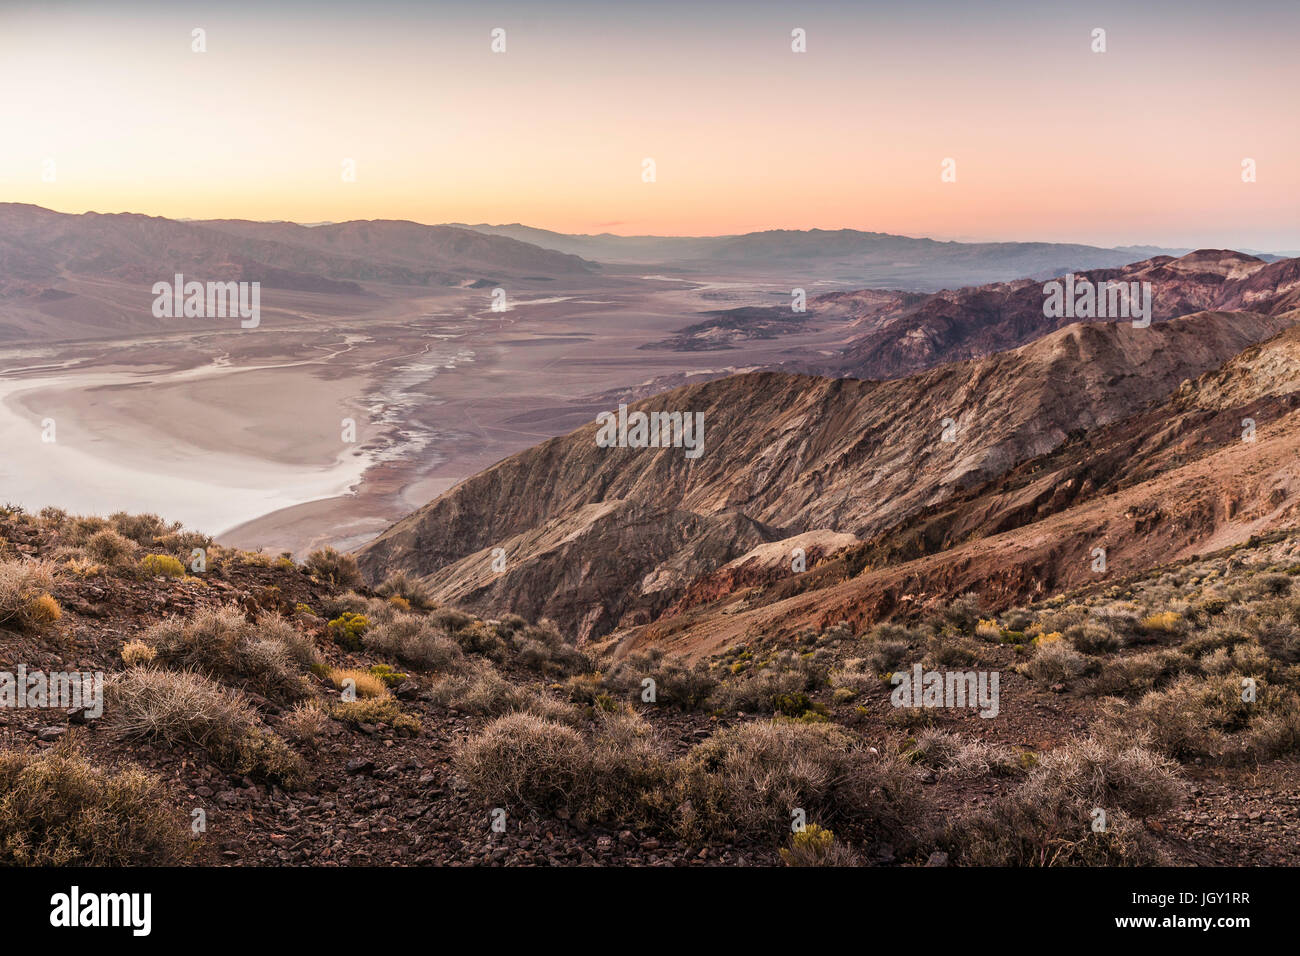 Landscape from Dante's View, Death Valley National Park, California, USA Stock Photo